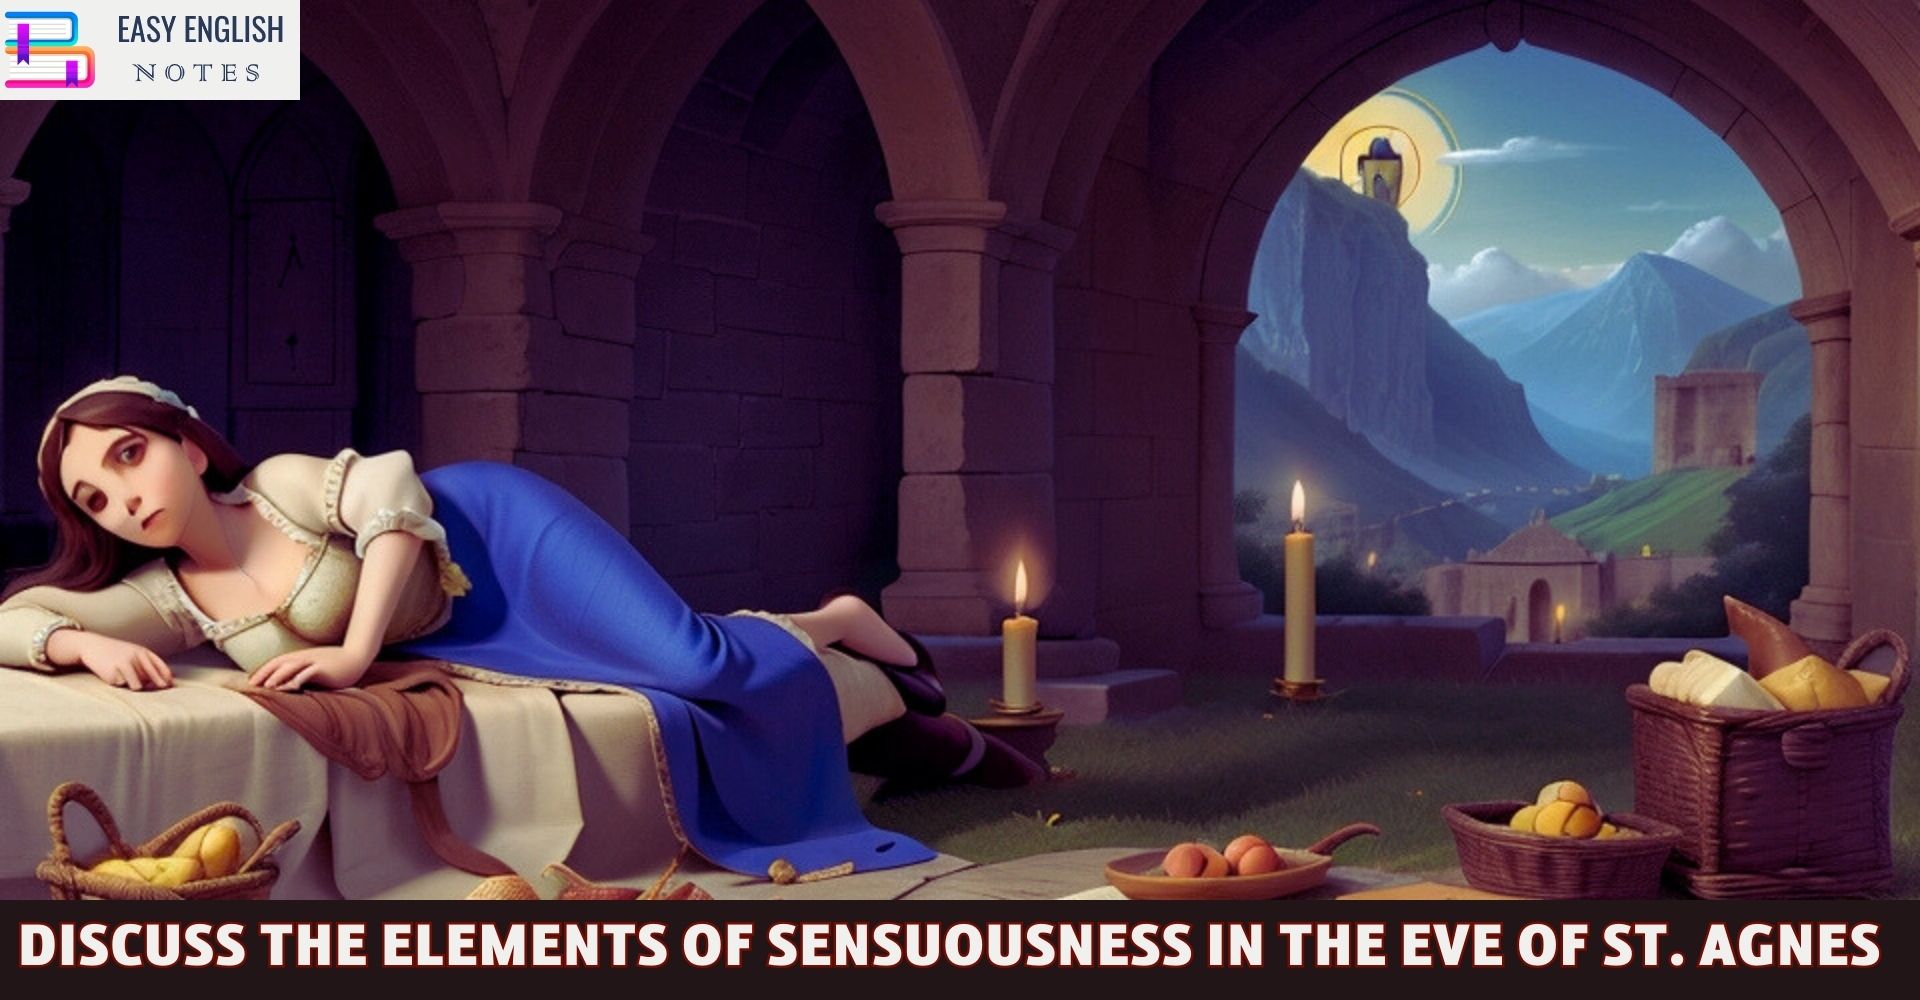 Discuss The Elements Of Sensuousness In The Eve Of St. Agnes